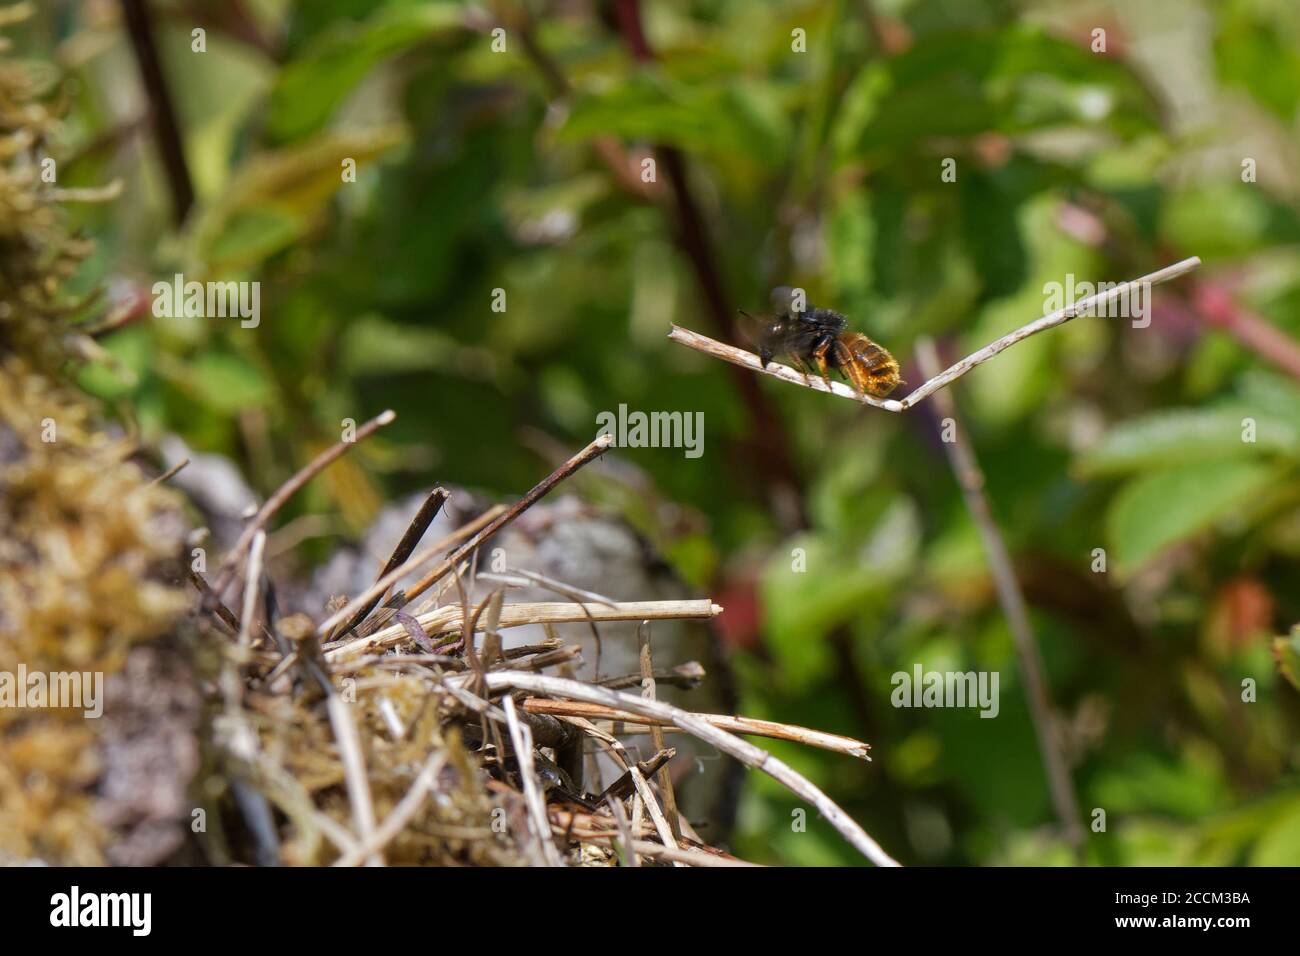 Two-coloured mason bee (Osmia bicolor) flying in with a stick to add to a pile of vegetation camouflaging her nest in a Brown-lipped snail shell, UK. Stock Photo